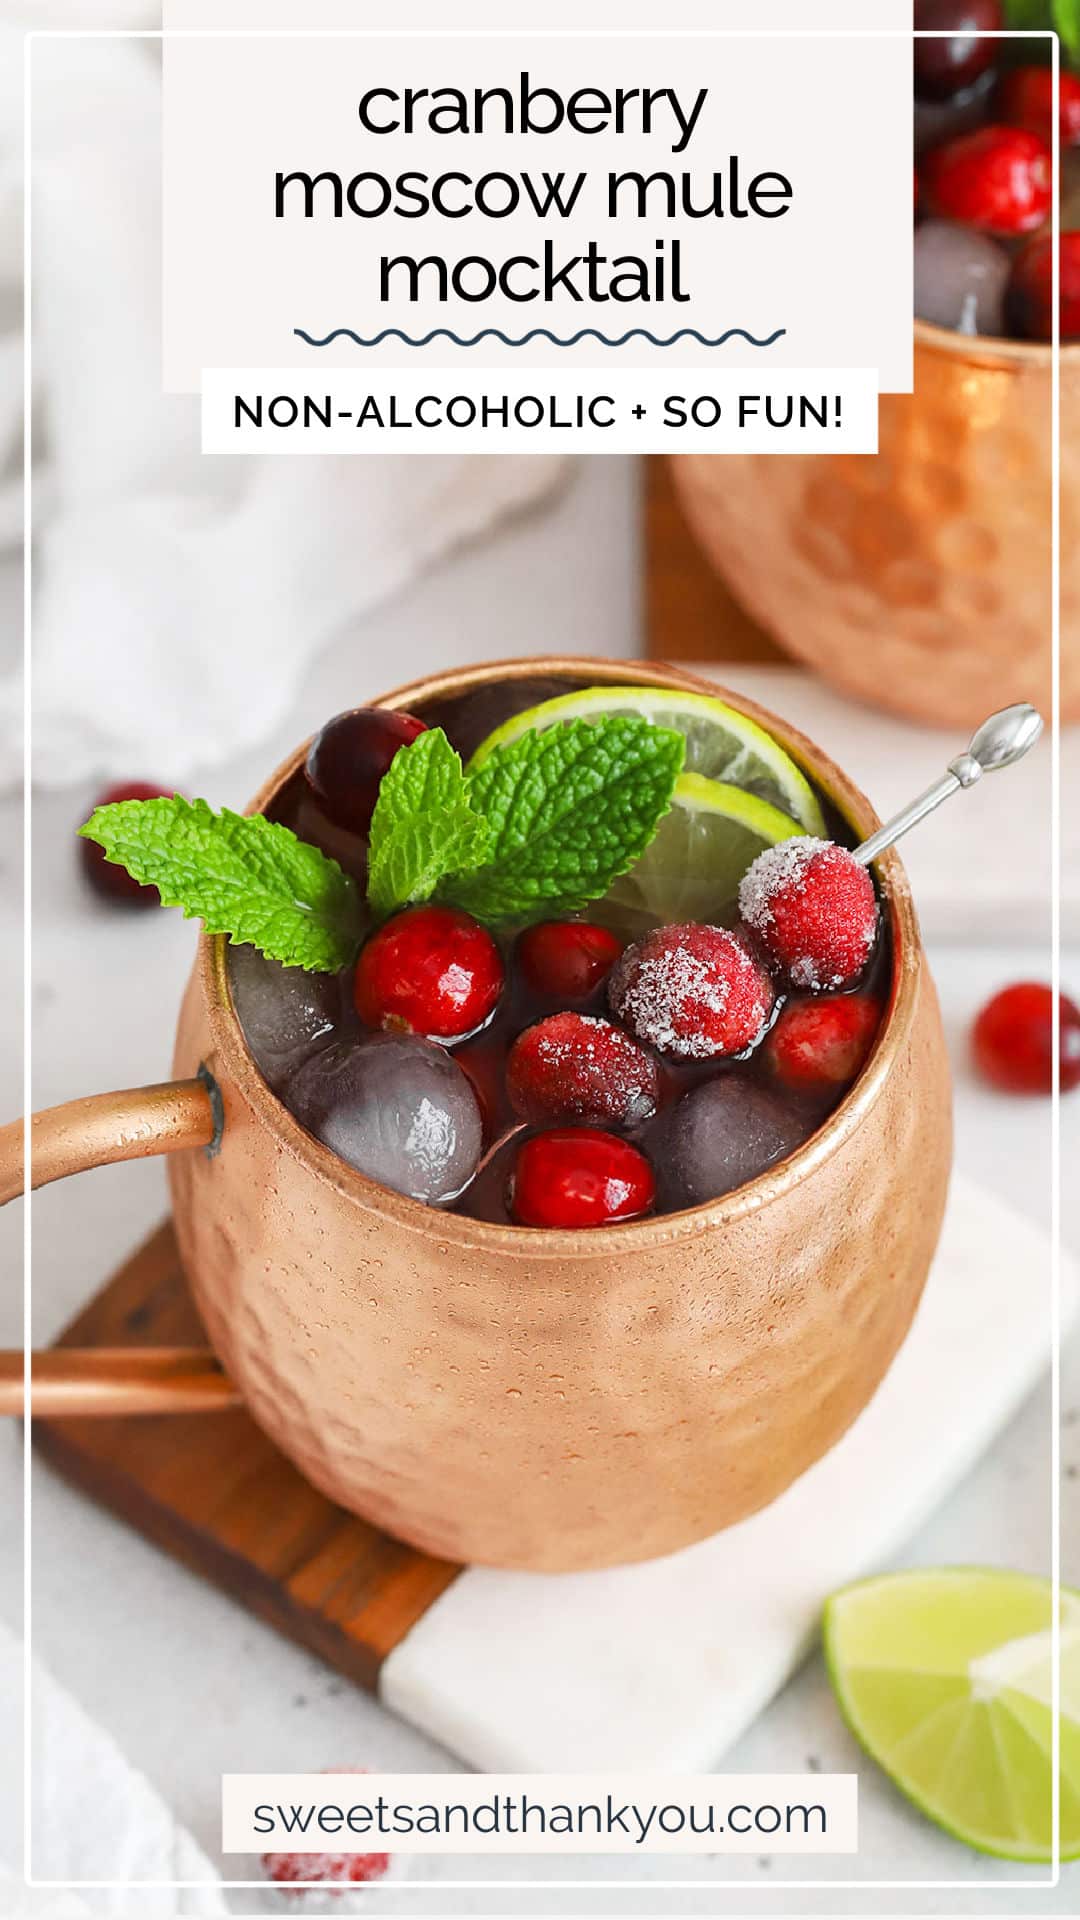 Our festive Cranberry Moscow Mule Mocktail recipe is a perfect holiday drink. With a fizzy mix of fresh & warm flavors and fun seasonal colors, this pretty red mocktail is the perfect holiday mocktail recipe for Thanksgiving, Christmas, New Year's Eve and more! 